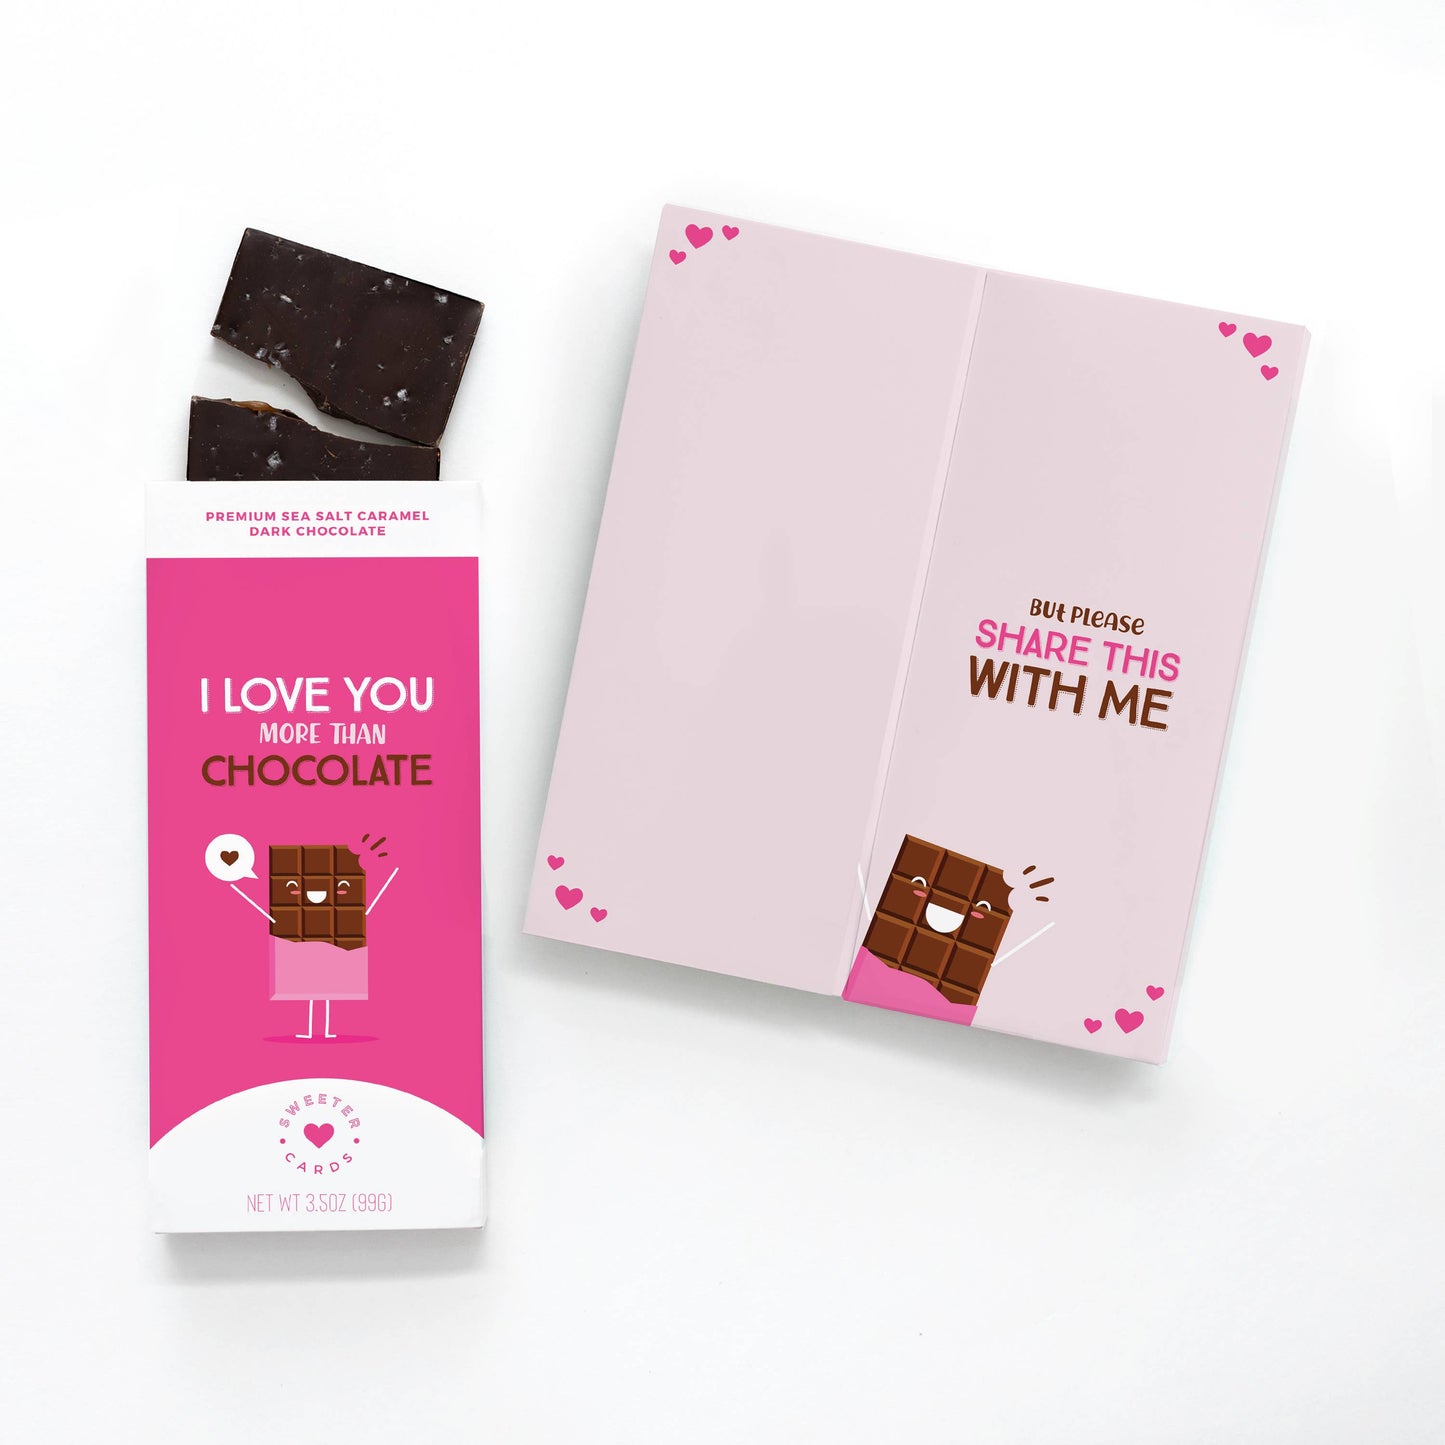 Love Card with Chocolate Bar Inside! More than Chocolate!